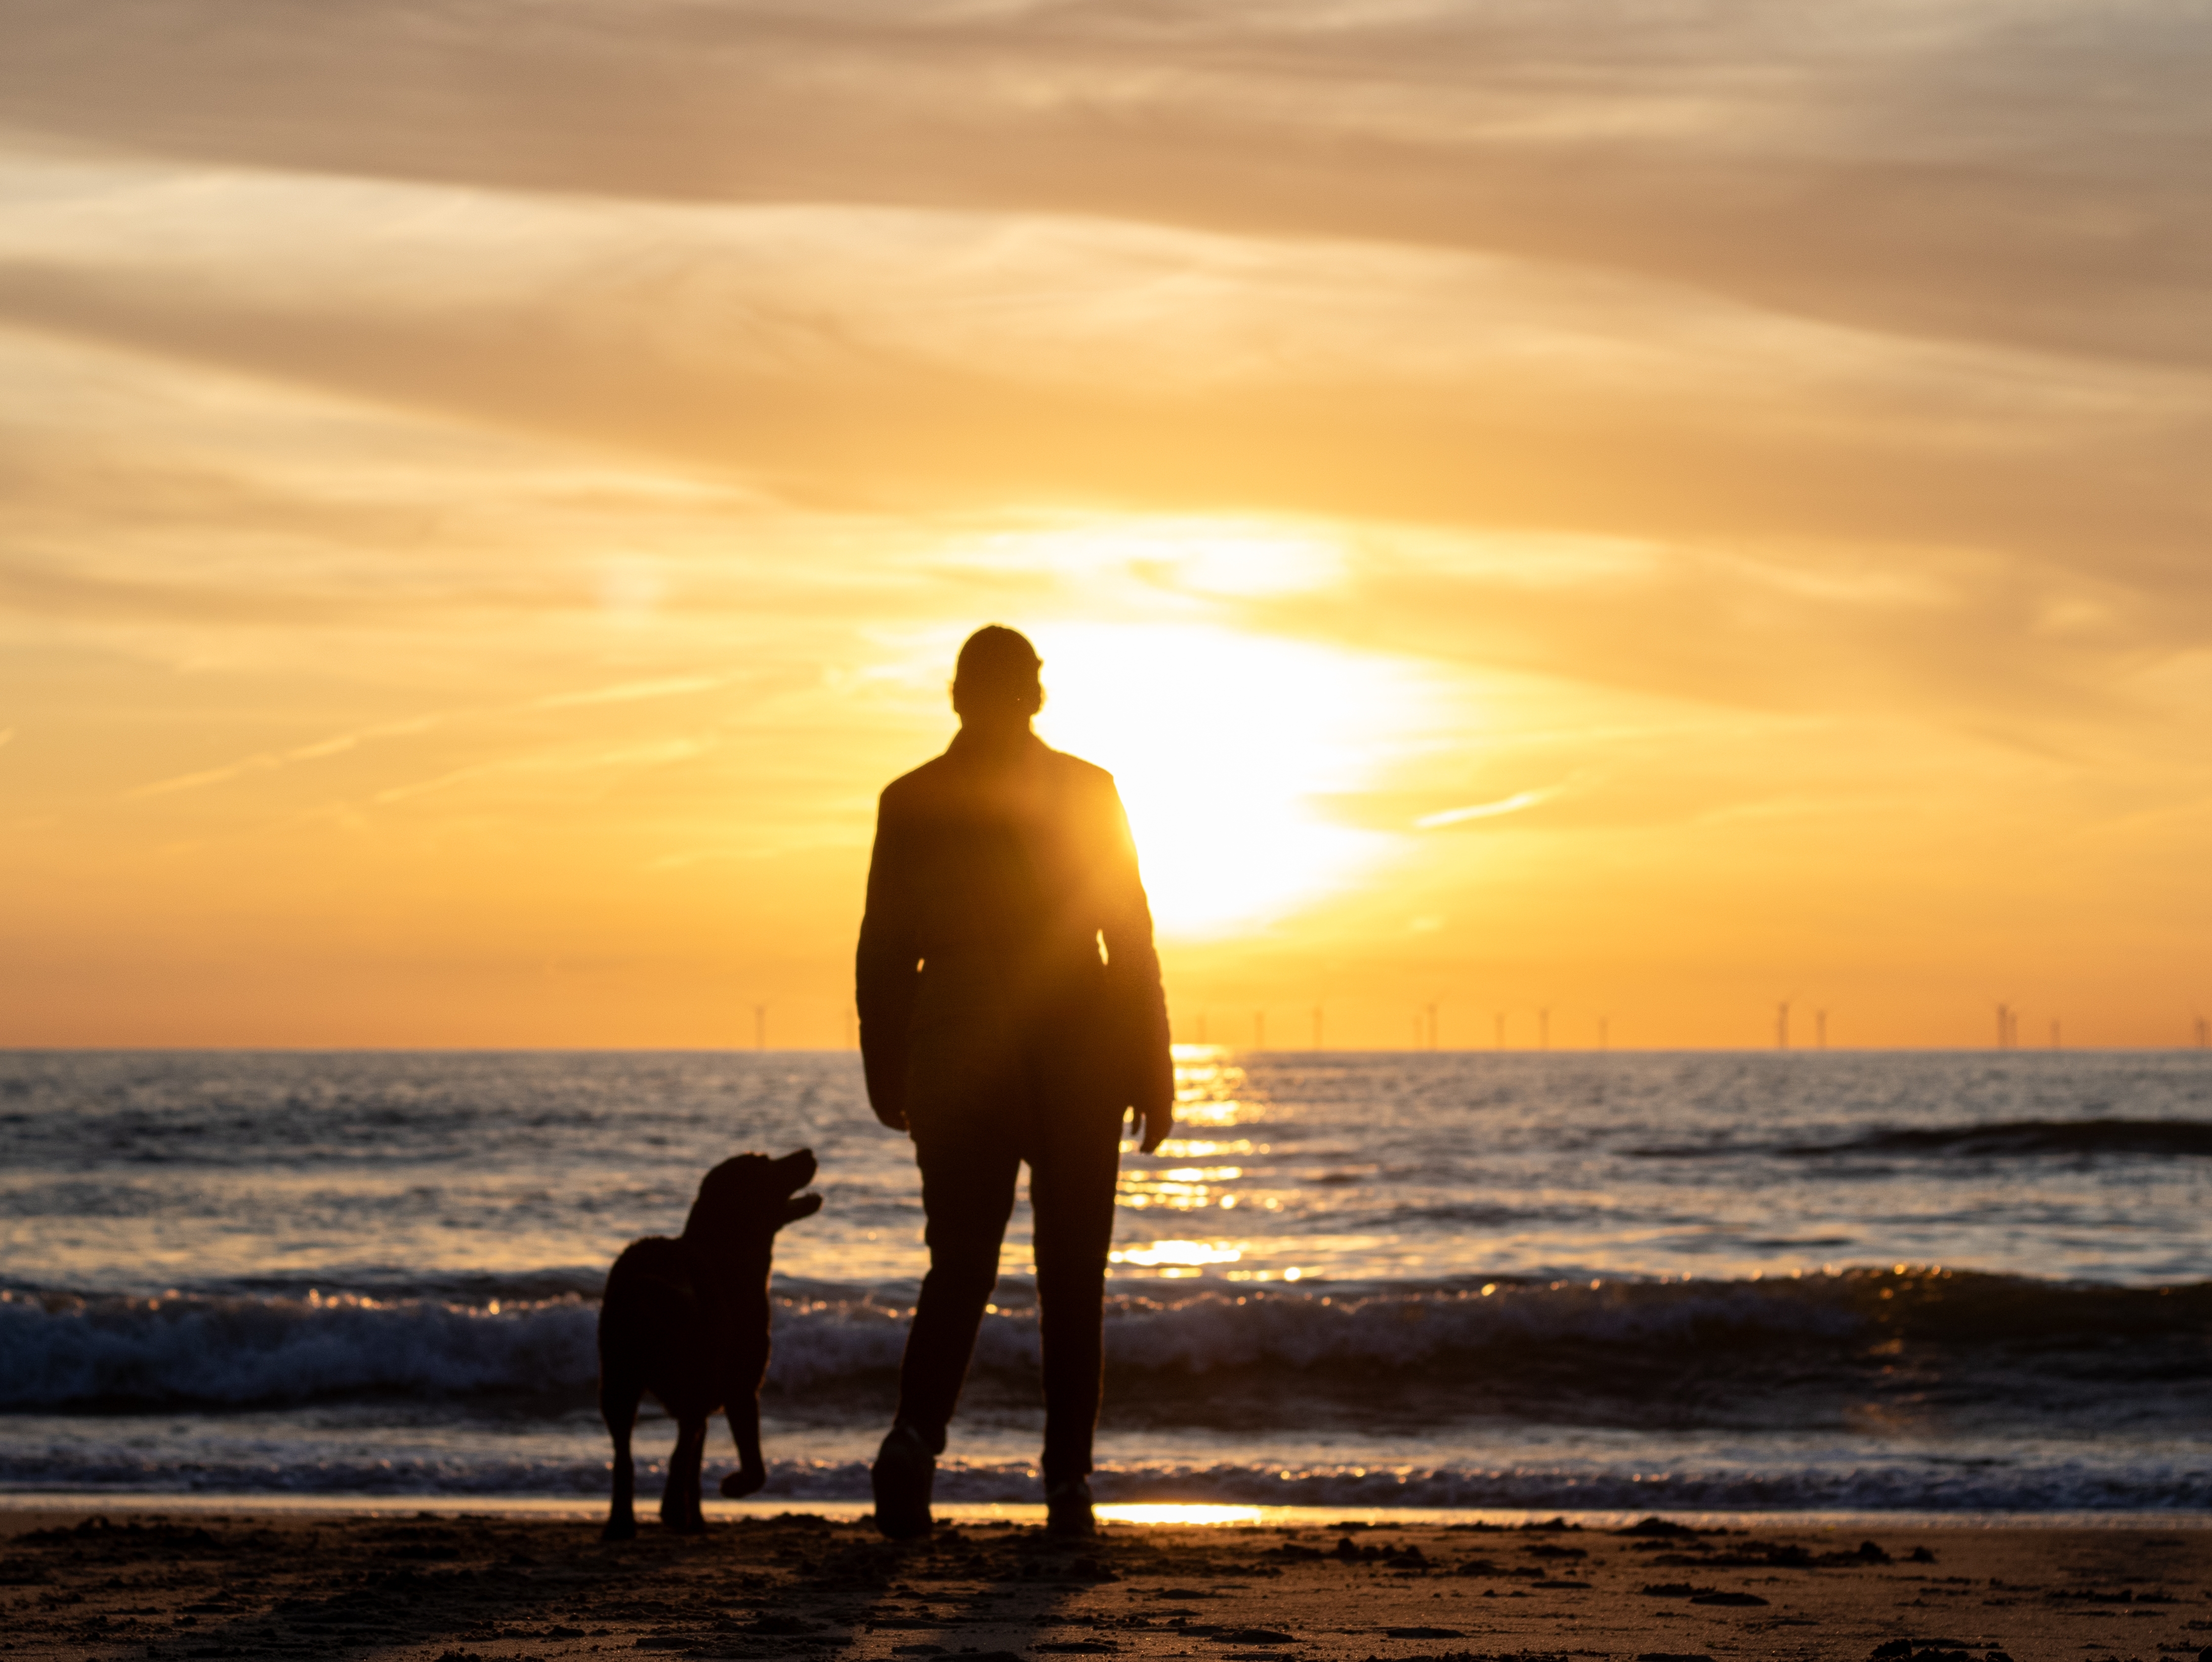 A silhouette of a man and his dog at the beach during sunset | Source: Shutterstock